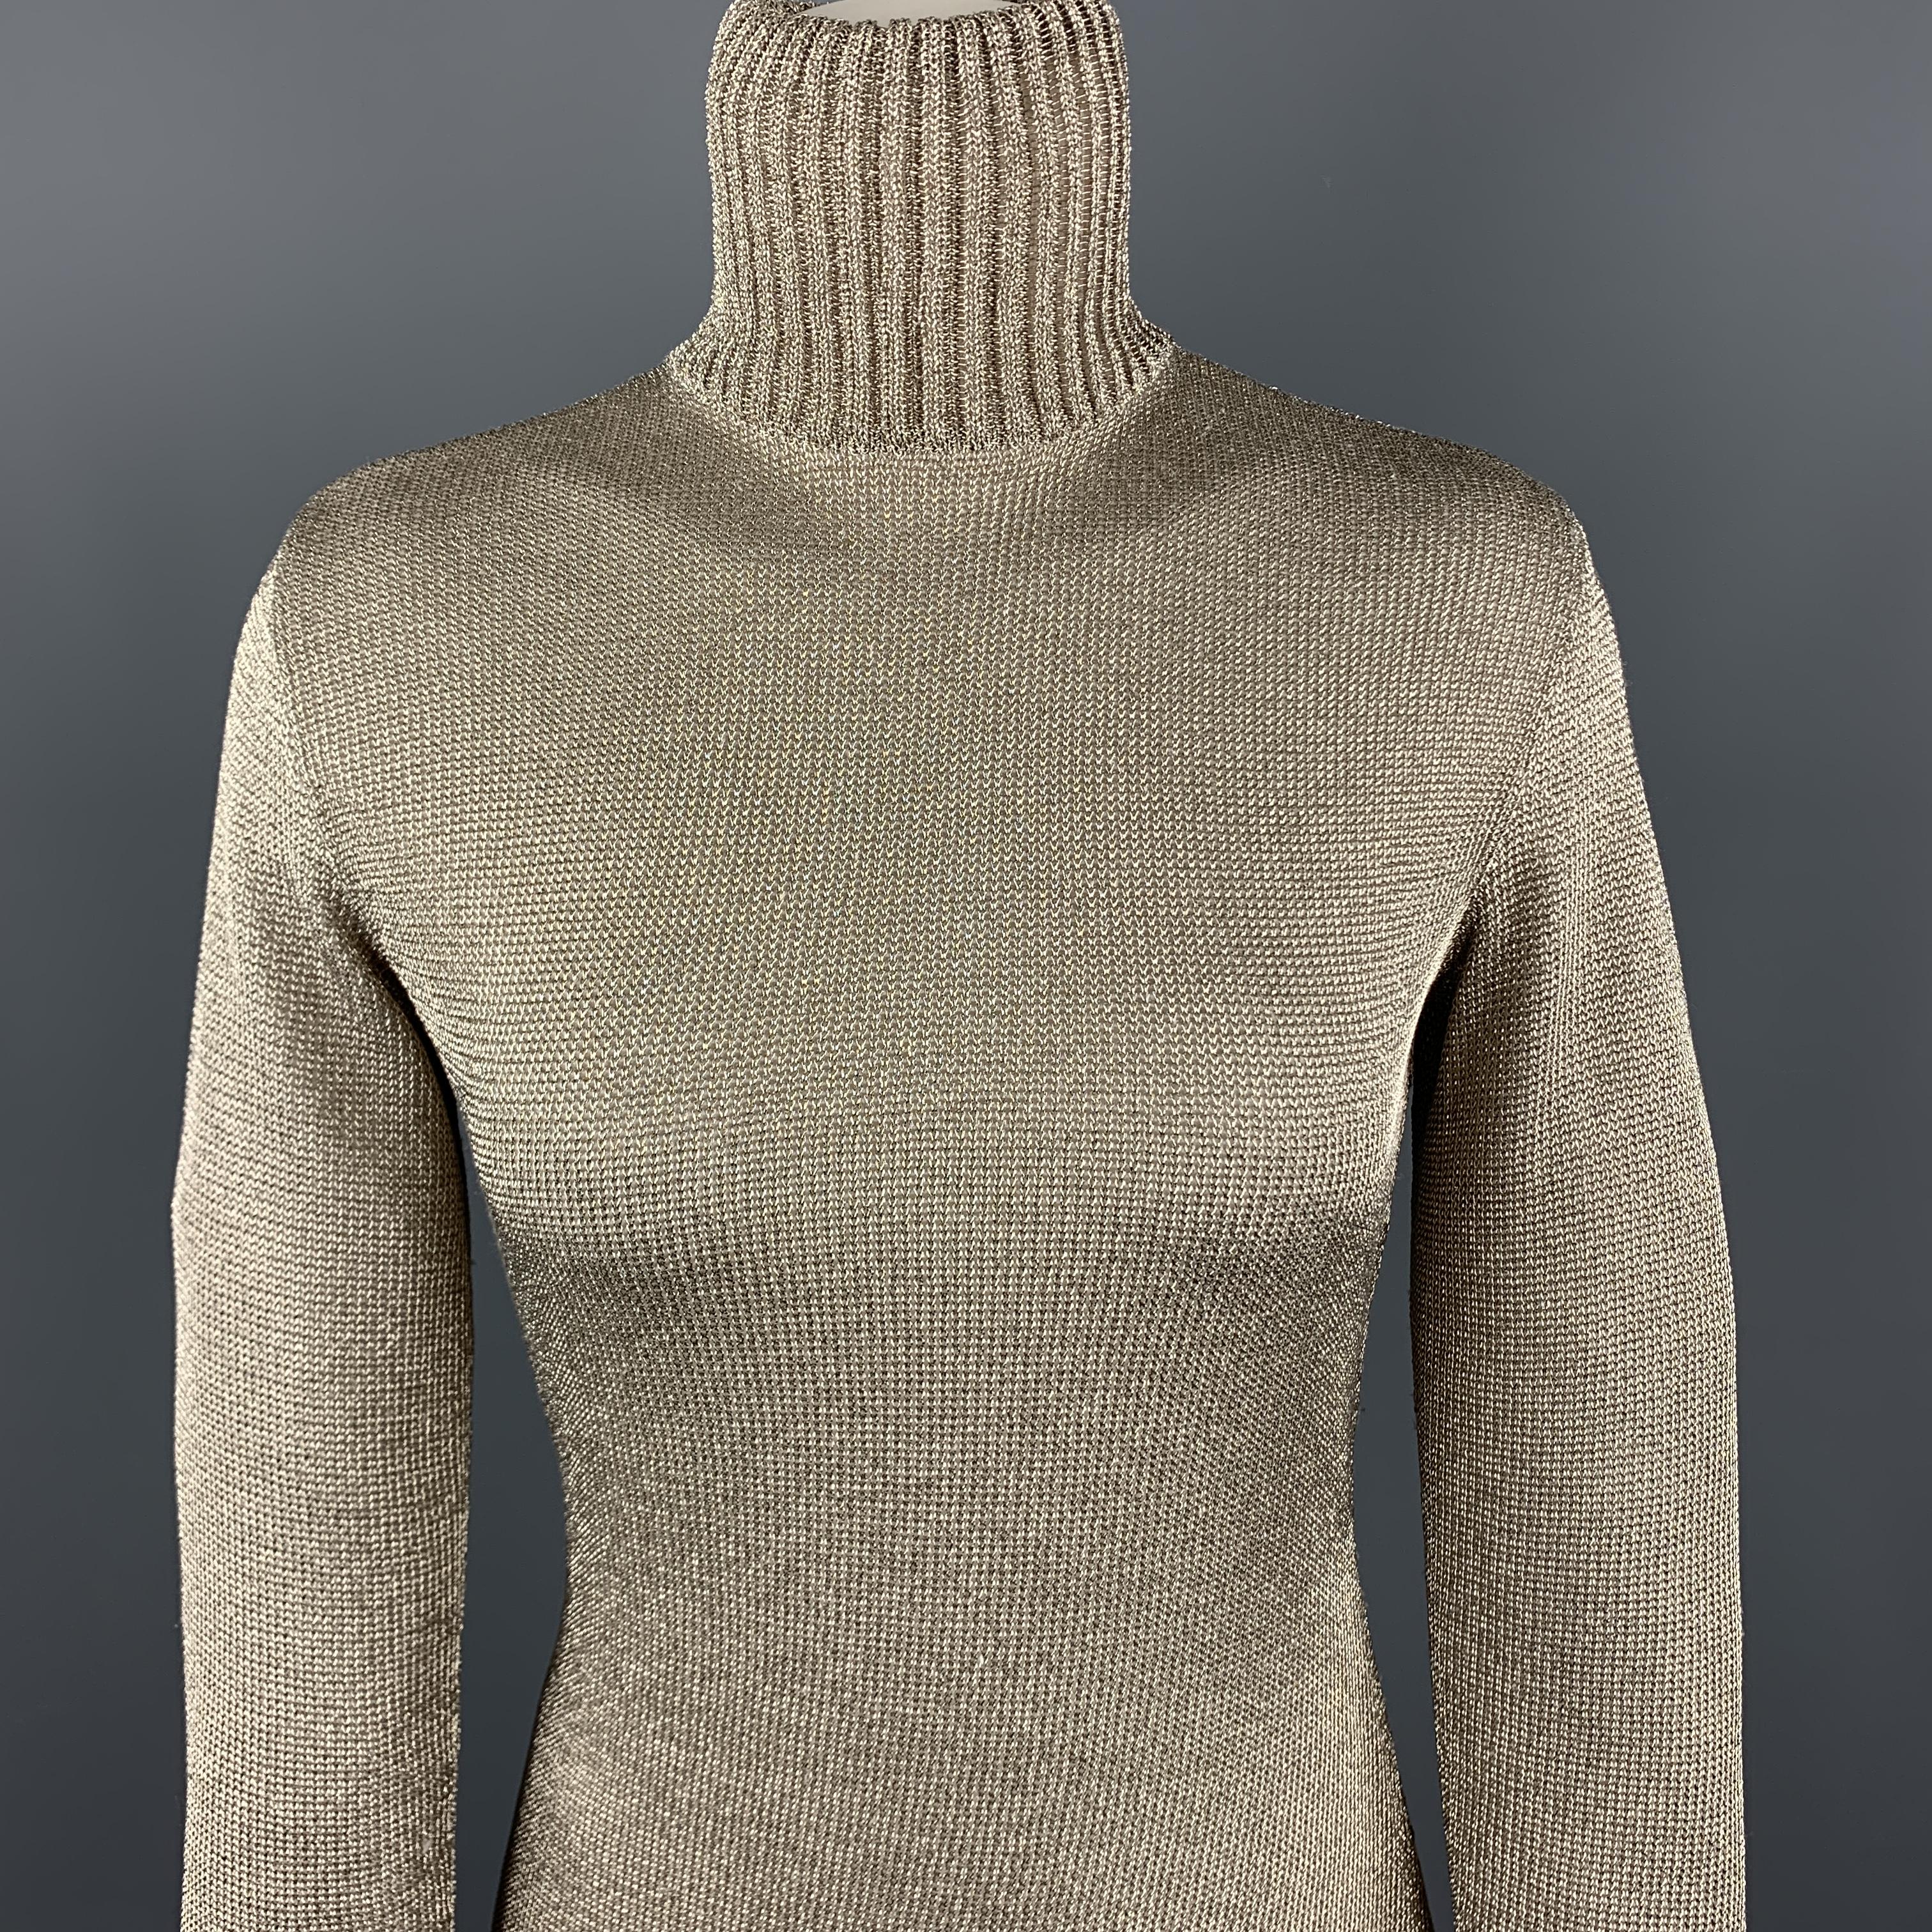 RALPH LAUREN BLUE LABEL dress comes in viscose blend knit with a metallic gold exterior, high ribbed knit collar, and hidden back zip. 

Excellent Pre-Owned Condition.
Marked: S

Measurements:

Shoulder: 14 in.
Bust: 34 in.
Waist: 287 in.
Hip: 34